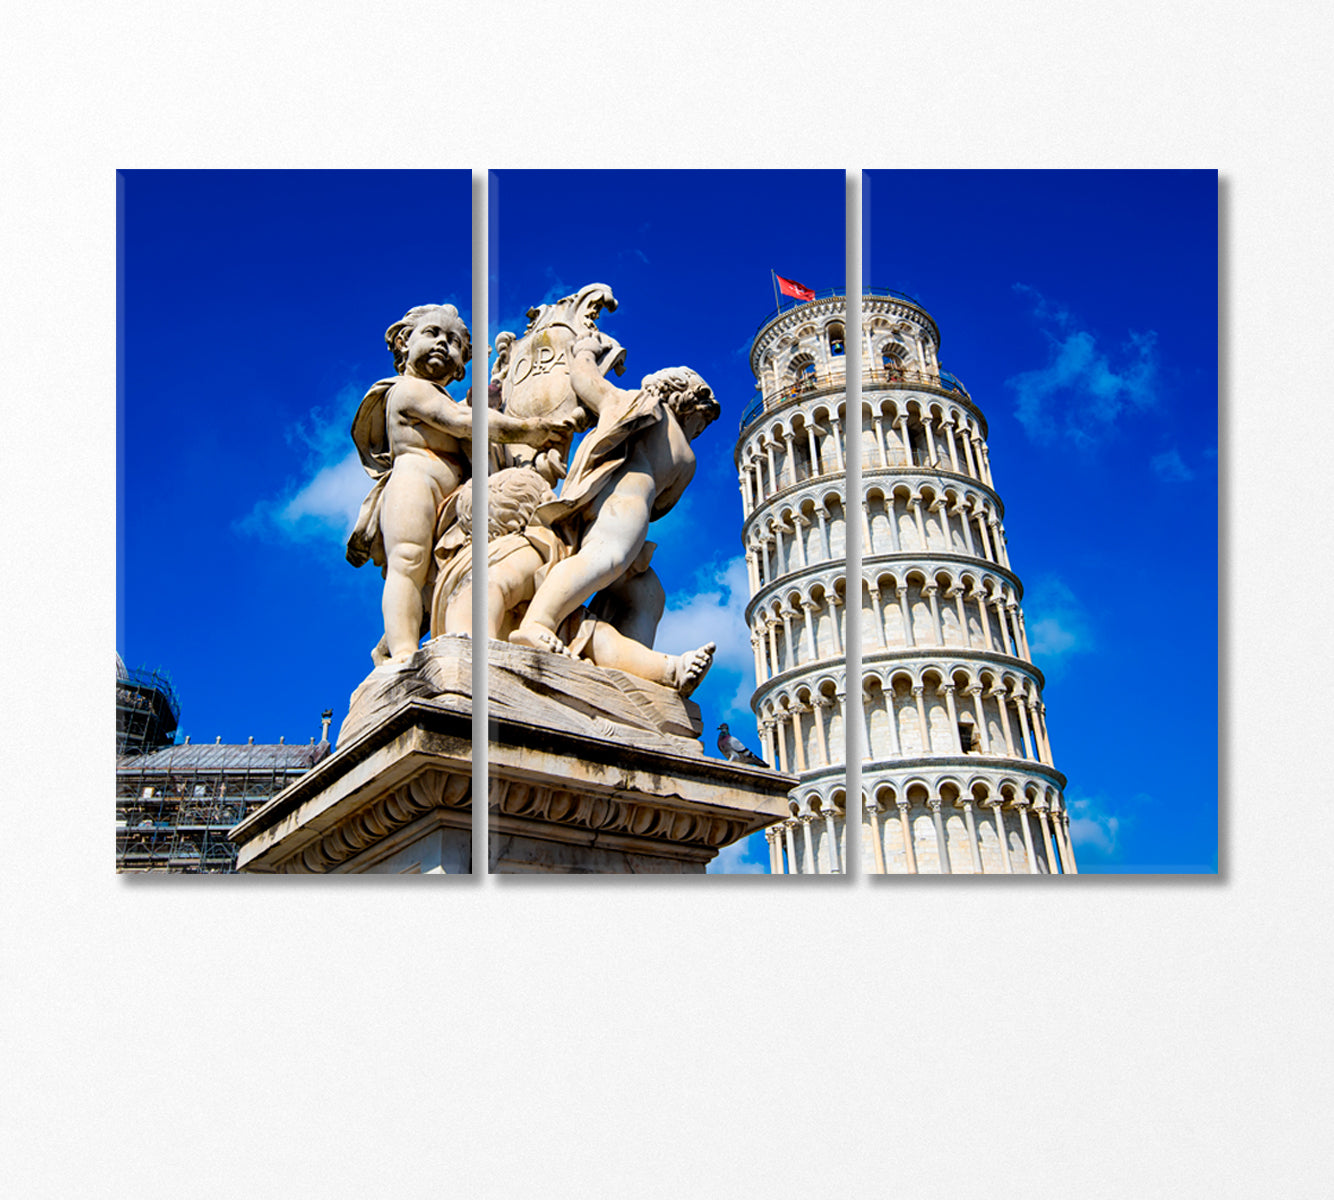 Fontana Dei Putti and Leaning Tower of Pisa Italy Canvas Print-Canvas Print-CetArt-3 Panels-36x24 inches-CetArt